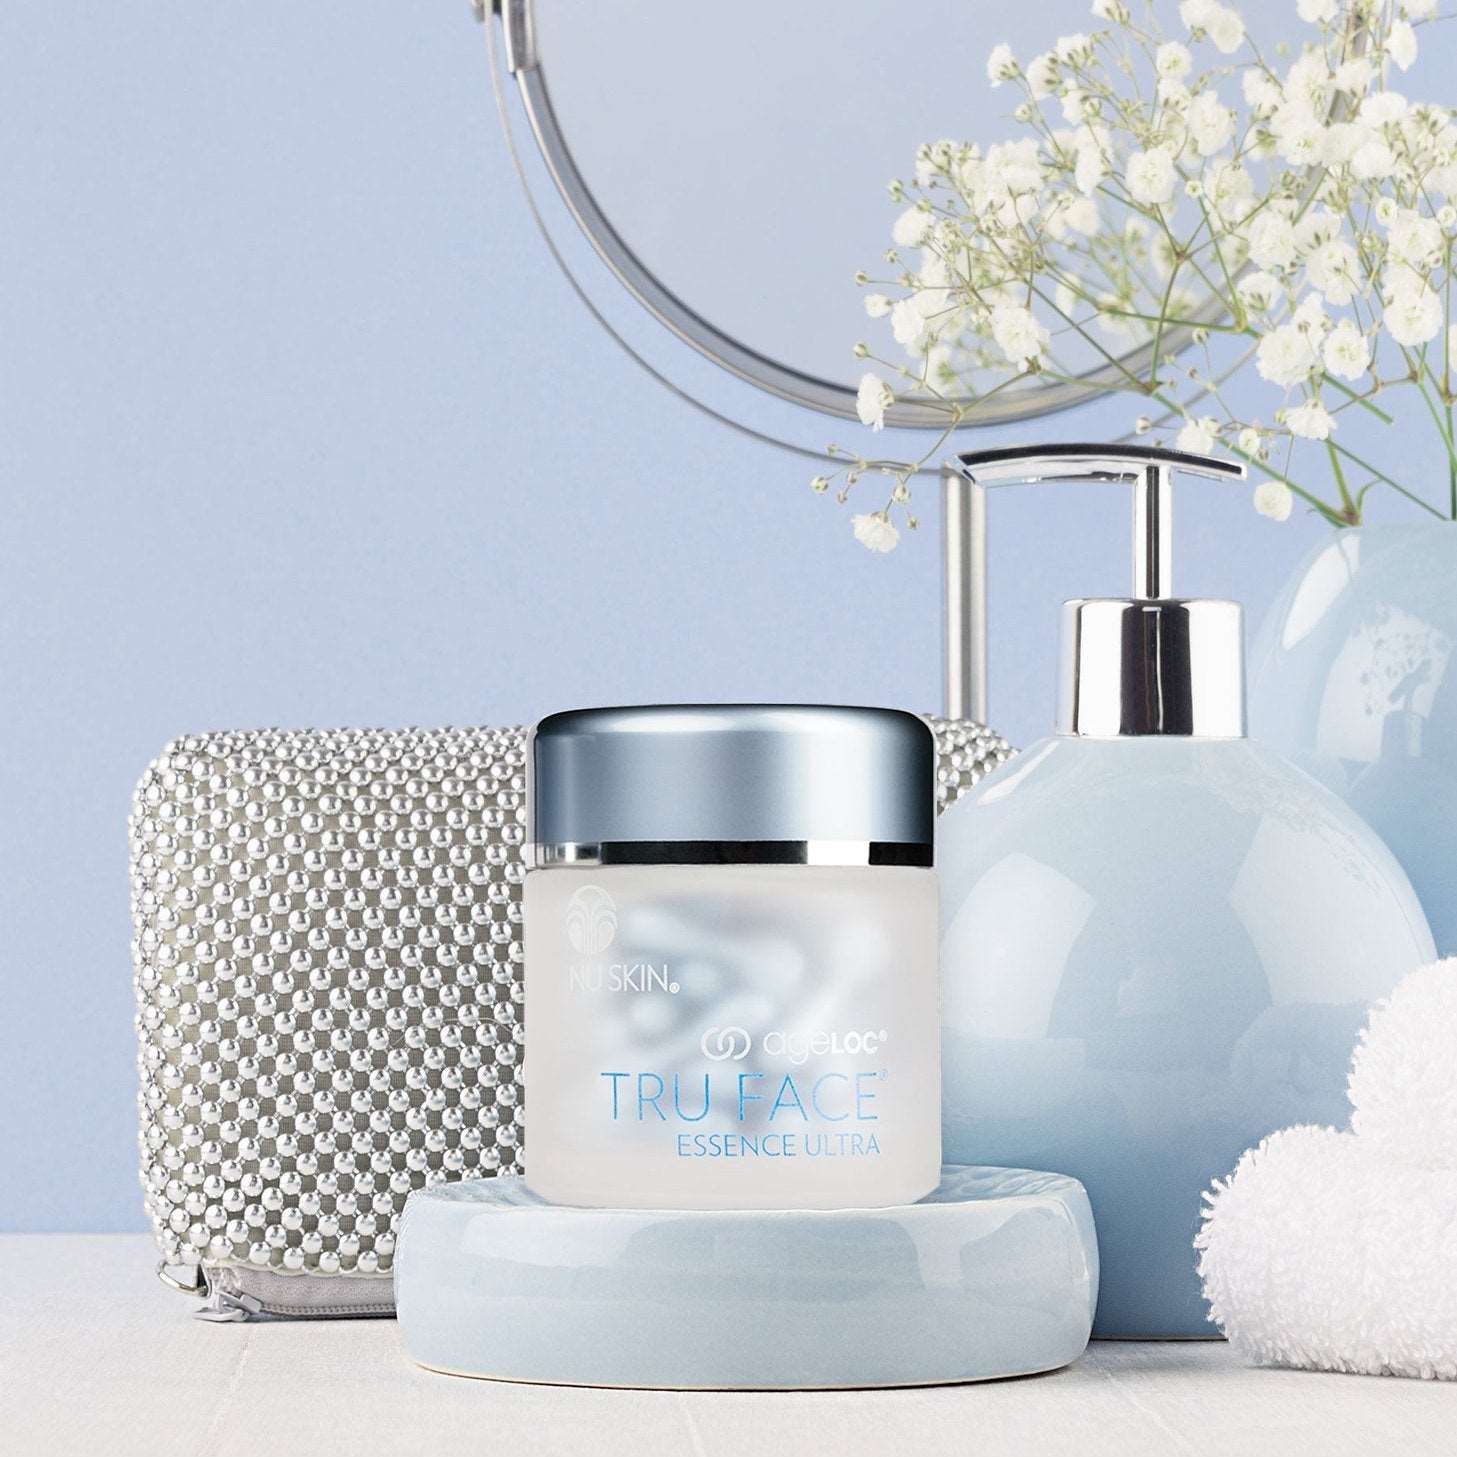 ageLOC® Tru Face® Essence UltraBuy ageLOC® Tru Face® Essence Ultra
* Discount will apply at checkout. 
Goodbye gravity, hello firmer, younger-looking skin. ageLOC Tru Face Essence Ultra is a firmiageLOC® Tru Face® Essence Ultra